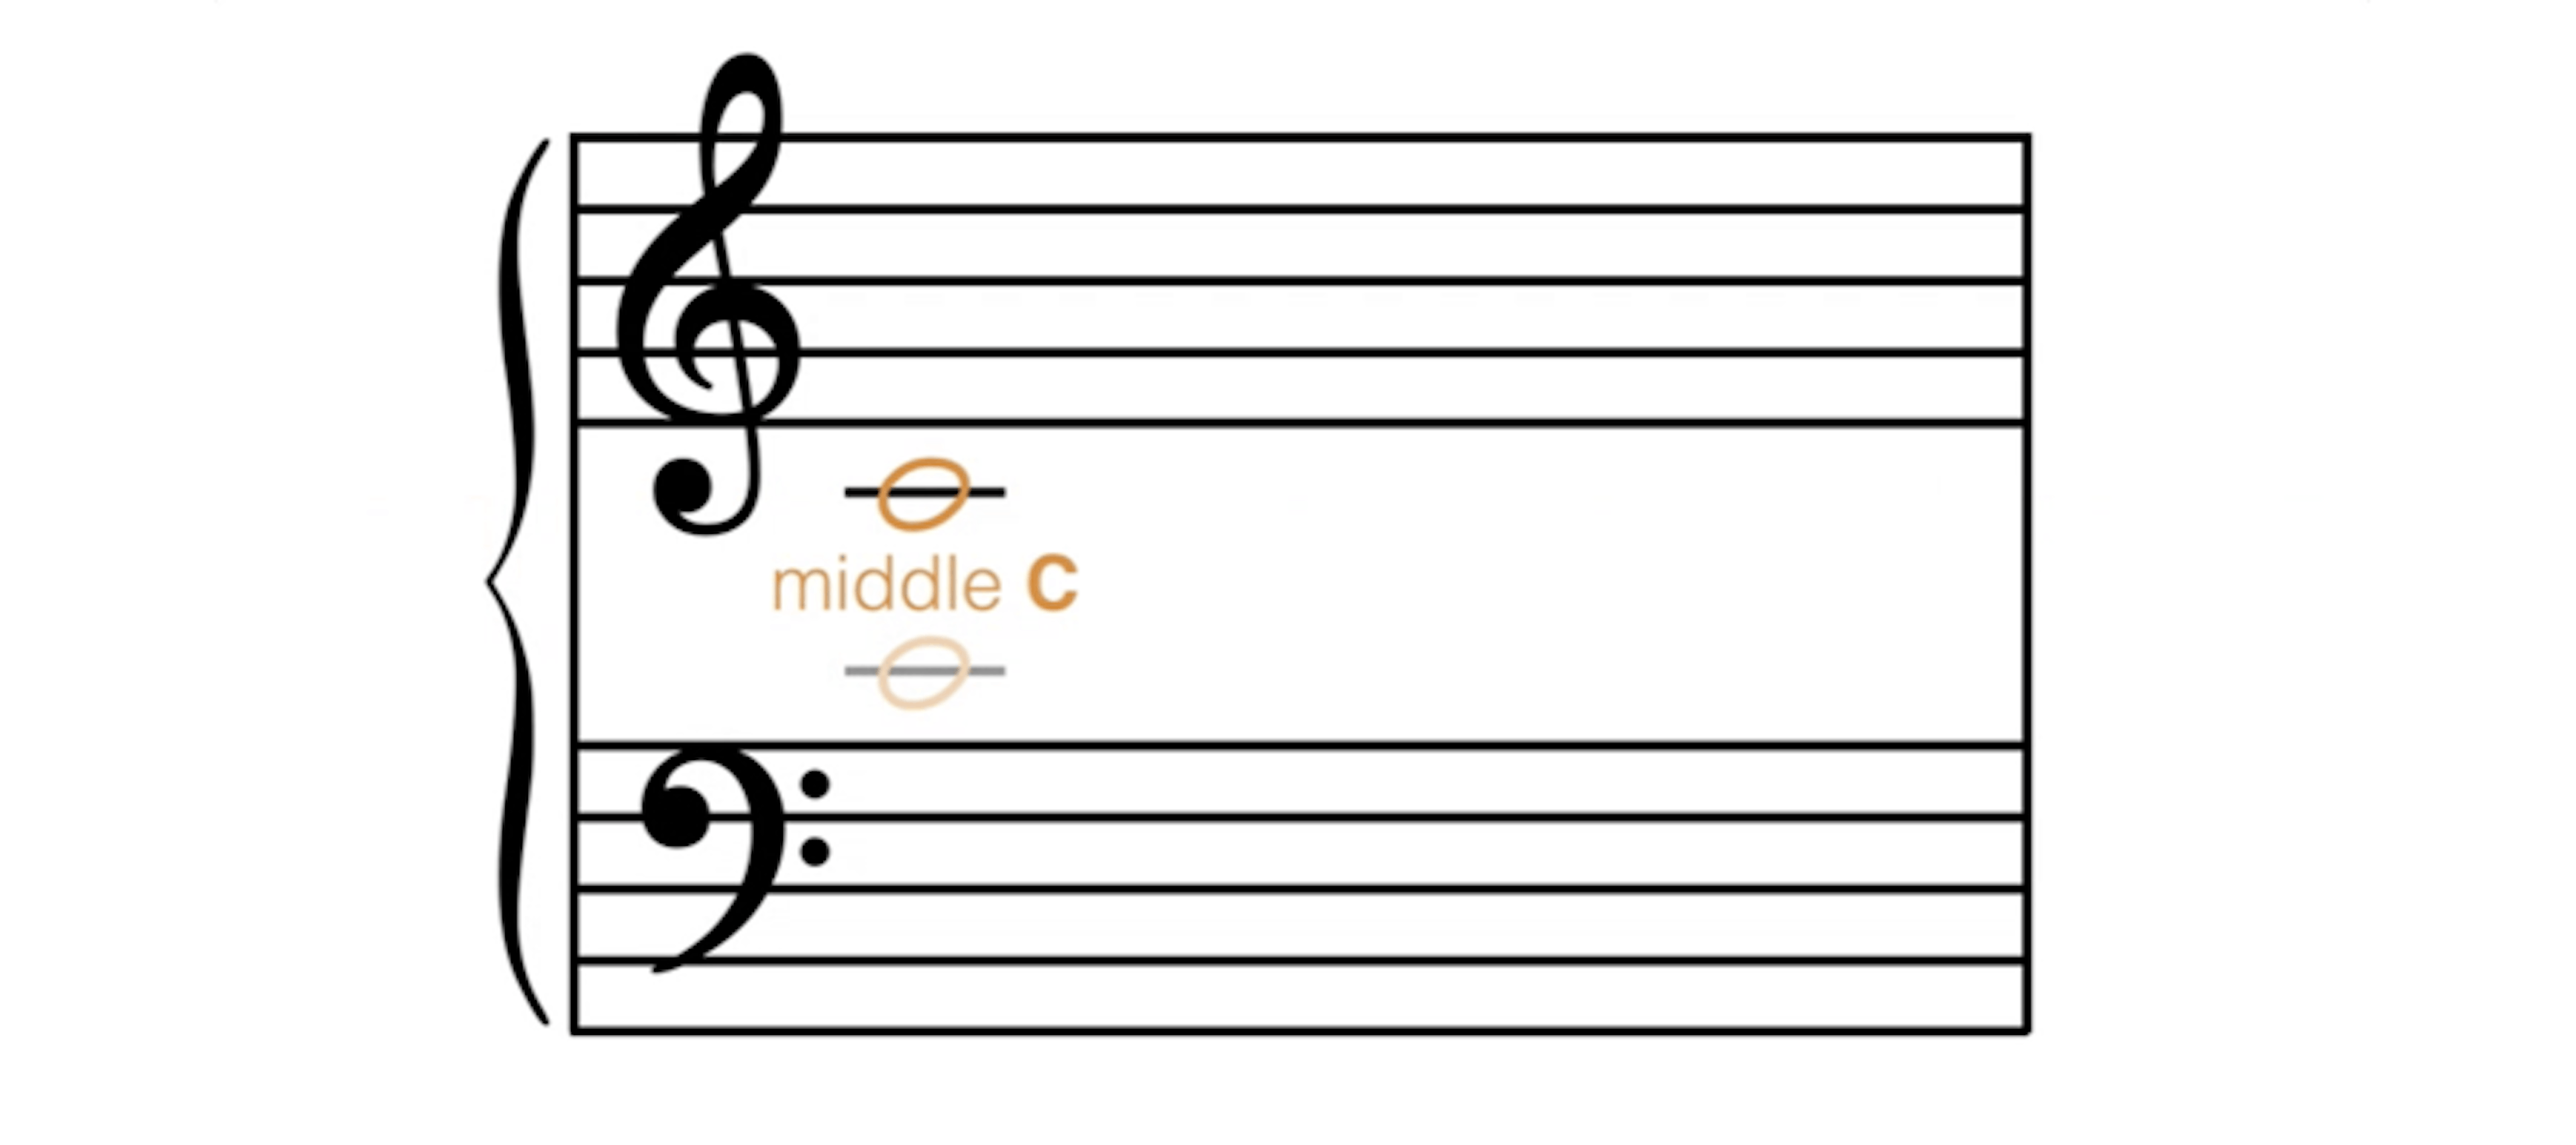 Middle C on the bass staff